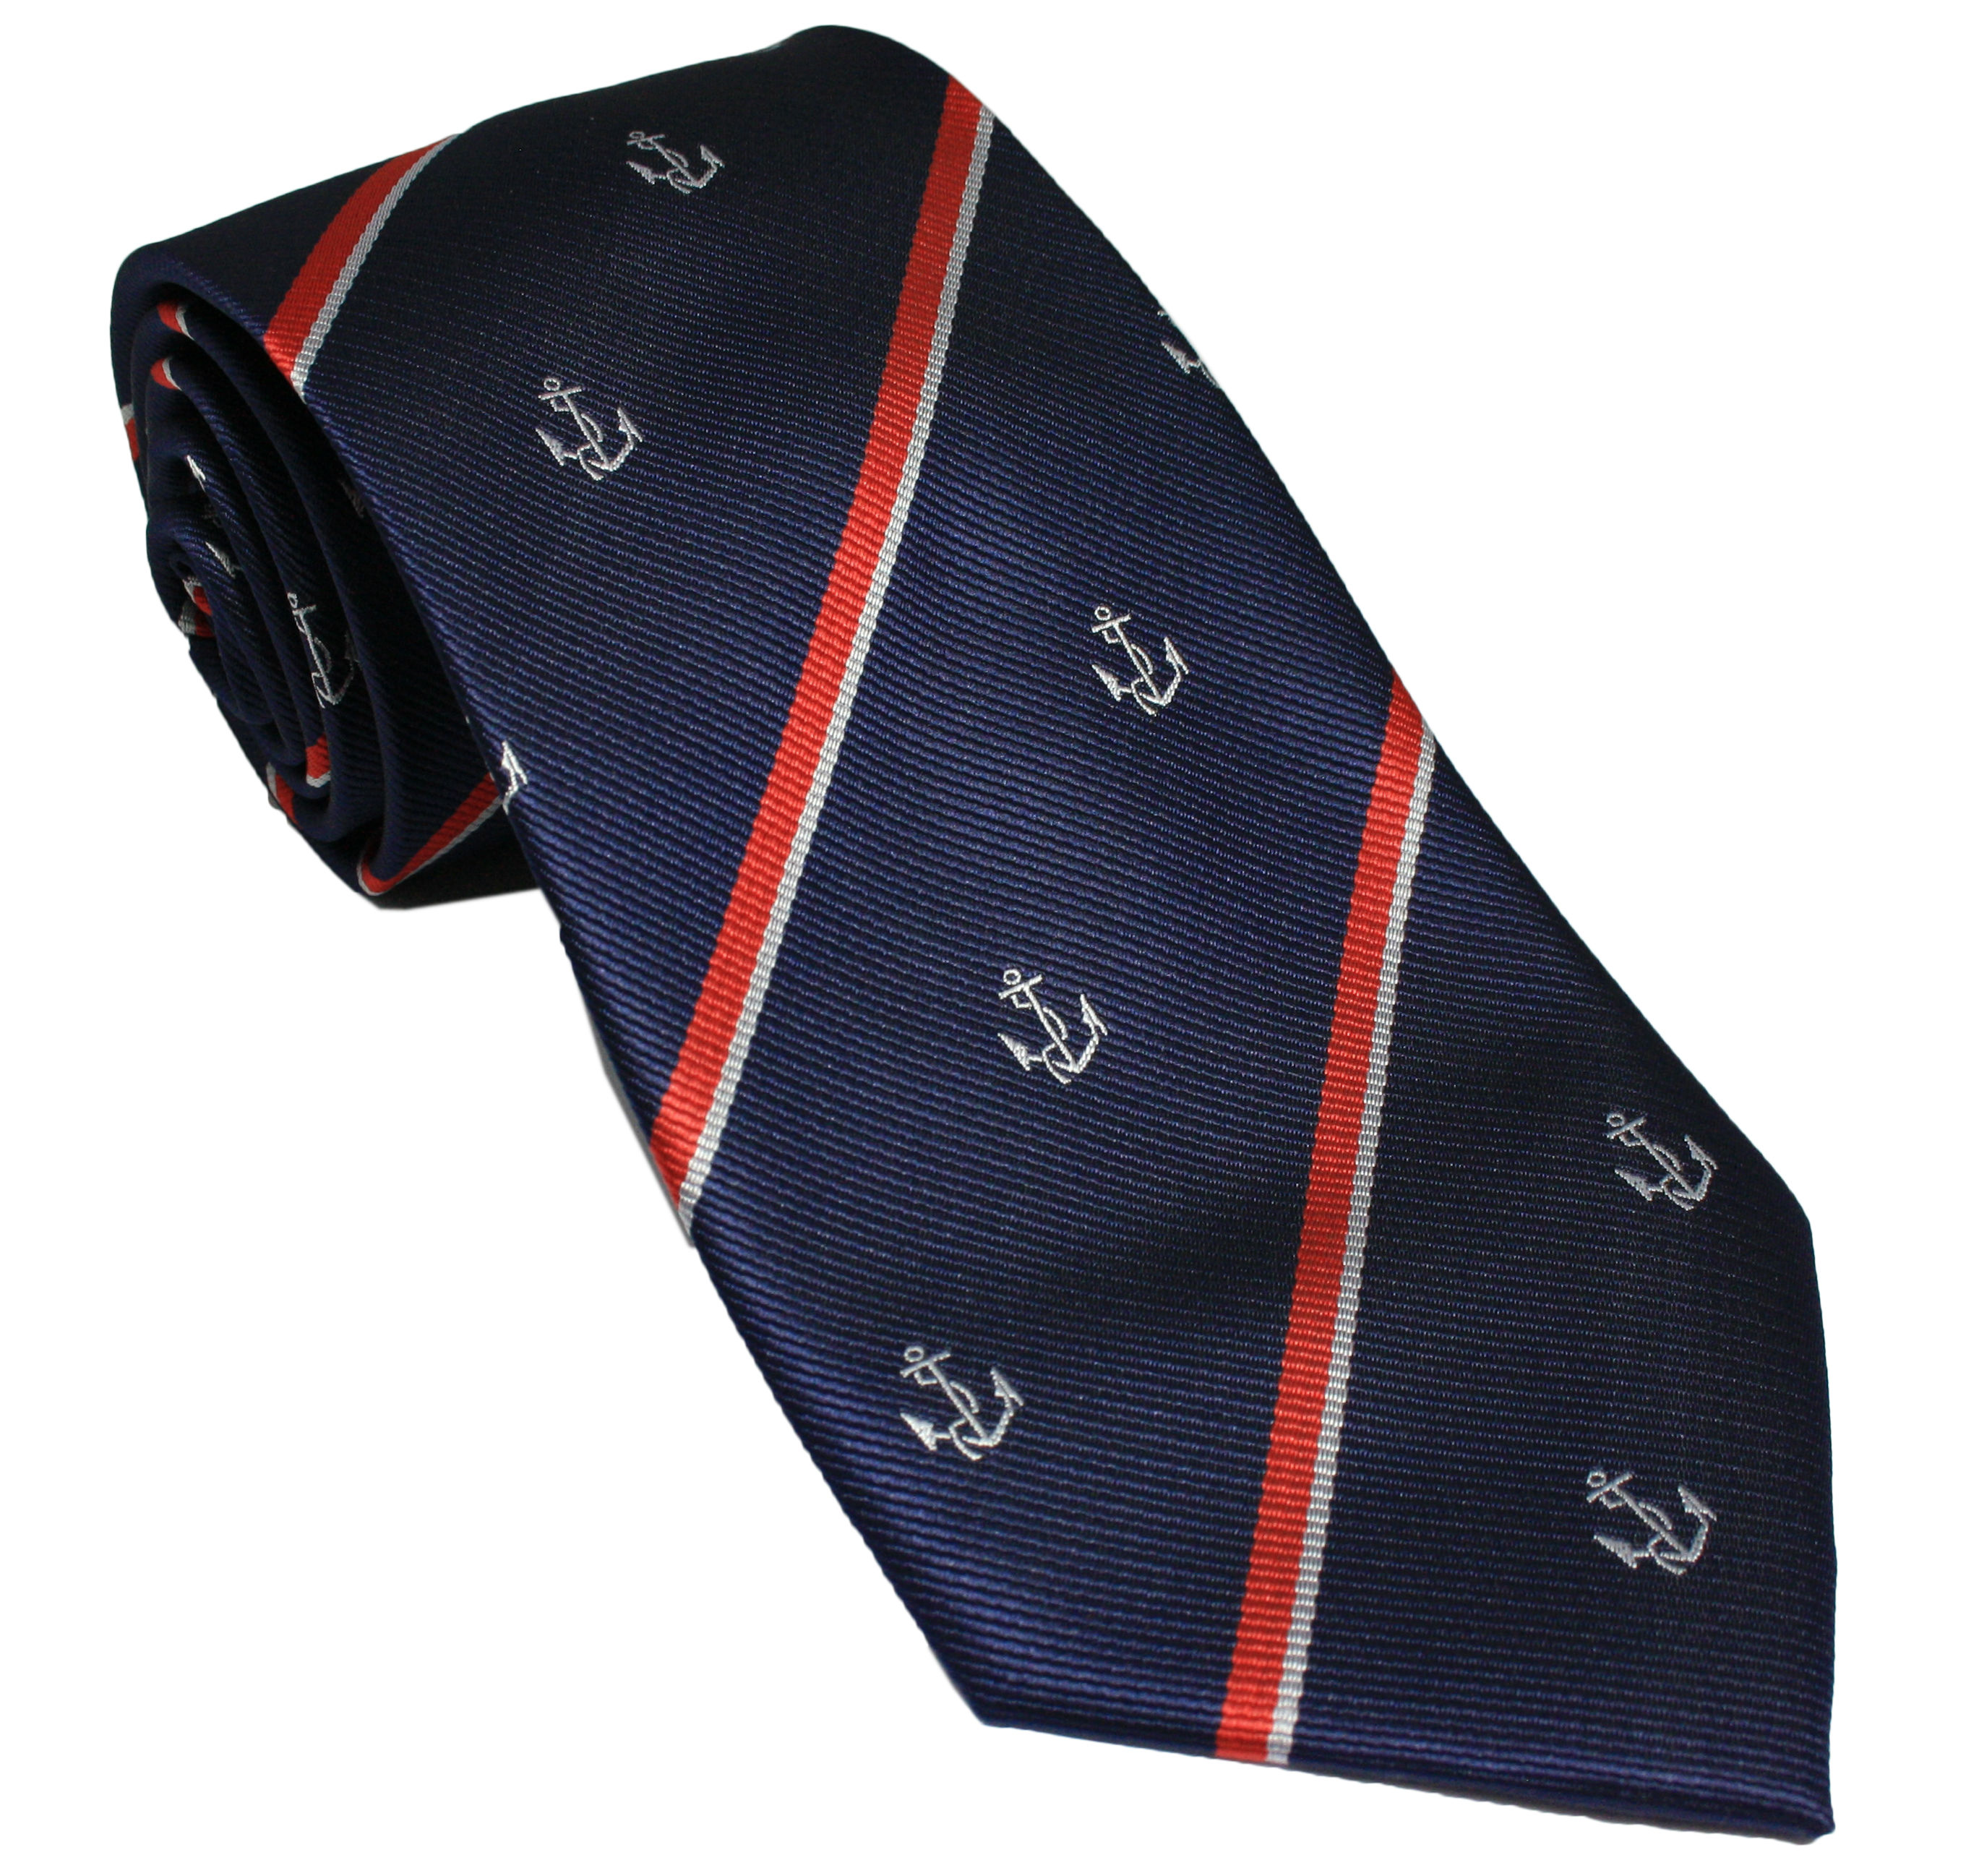 Royal Navy Anchor and Stripes Tie